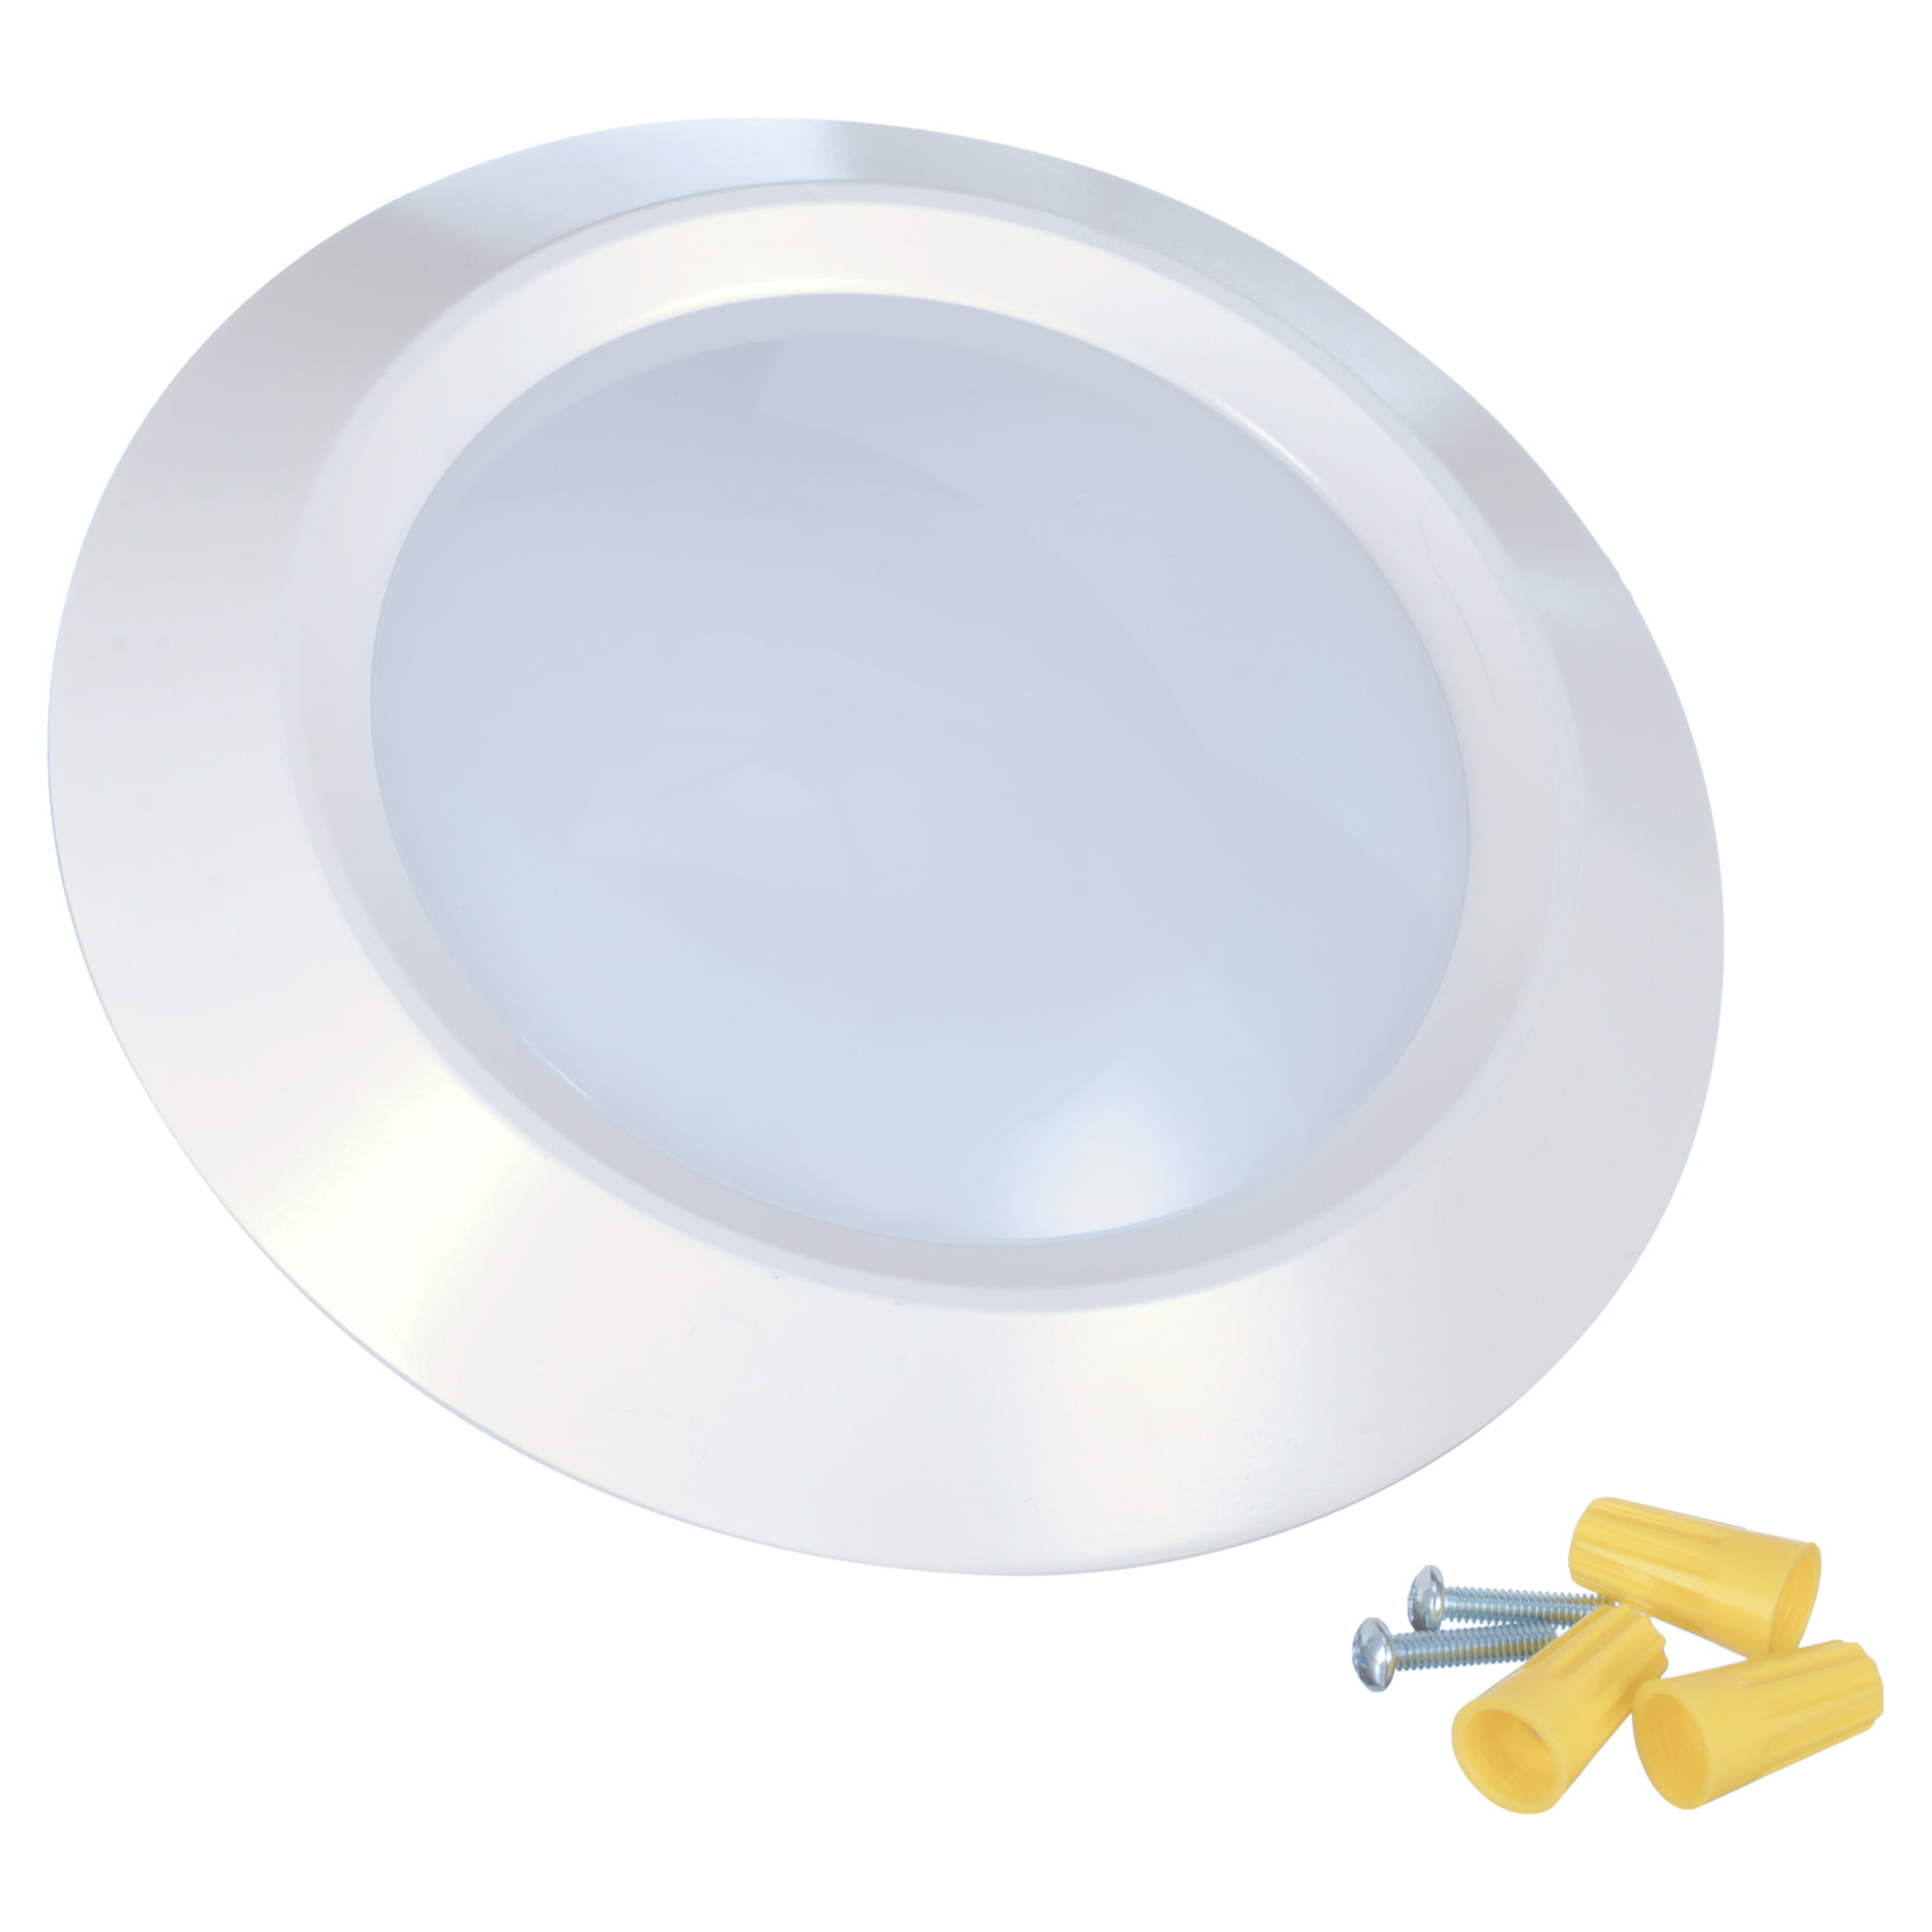 C-Lite Cree Lighting 4 LED Surface Mount Disk Light 65W Equivalent, 650 Cool White 4000K, 50,000 hour rated life | 1-Pack - Walmart.com